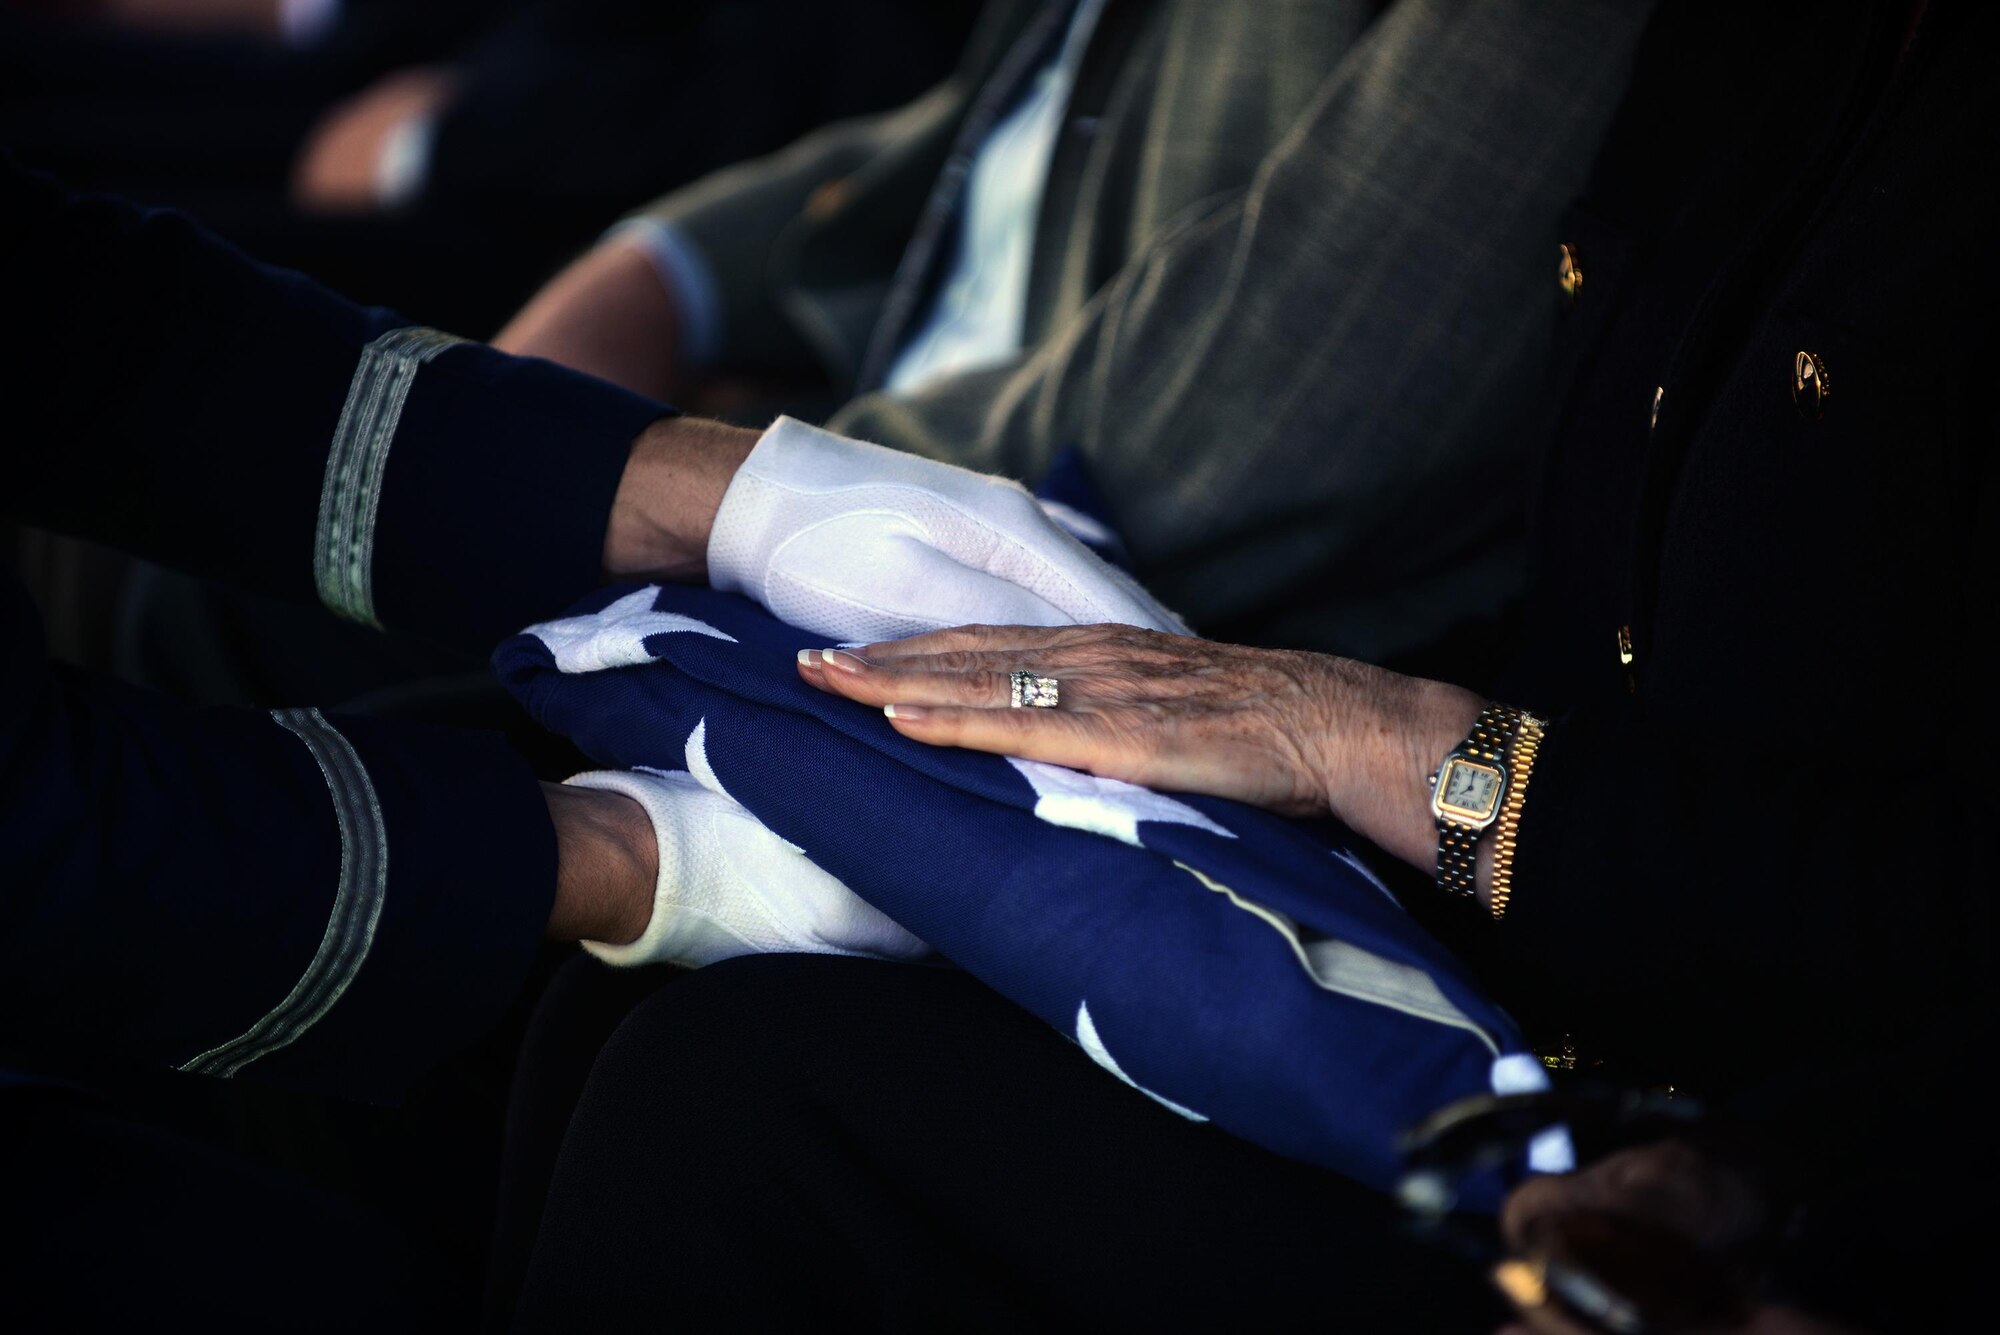 Staff Sgt. Richard Bates, 47th Flying Training Wing Base Honor Guard NCO in charge presents the flag to retired Maj. Gen. Lewis’s wife in Eagle Pass, Texas, on Oct. 28, 2015. Upon presentation of the flag, the presenter says, “On behalf of the President of the United States, and a grateful Nation, please accept this flag as a symbol of our appreciation for your loved one's honorable and faithful service.” (U.S. Air Force photo by Tech. Sgt. Steven R. Doty)(Released)